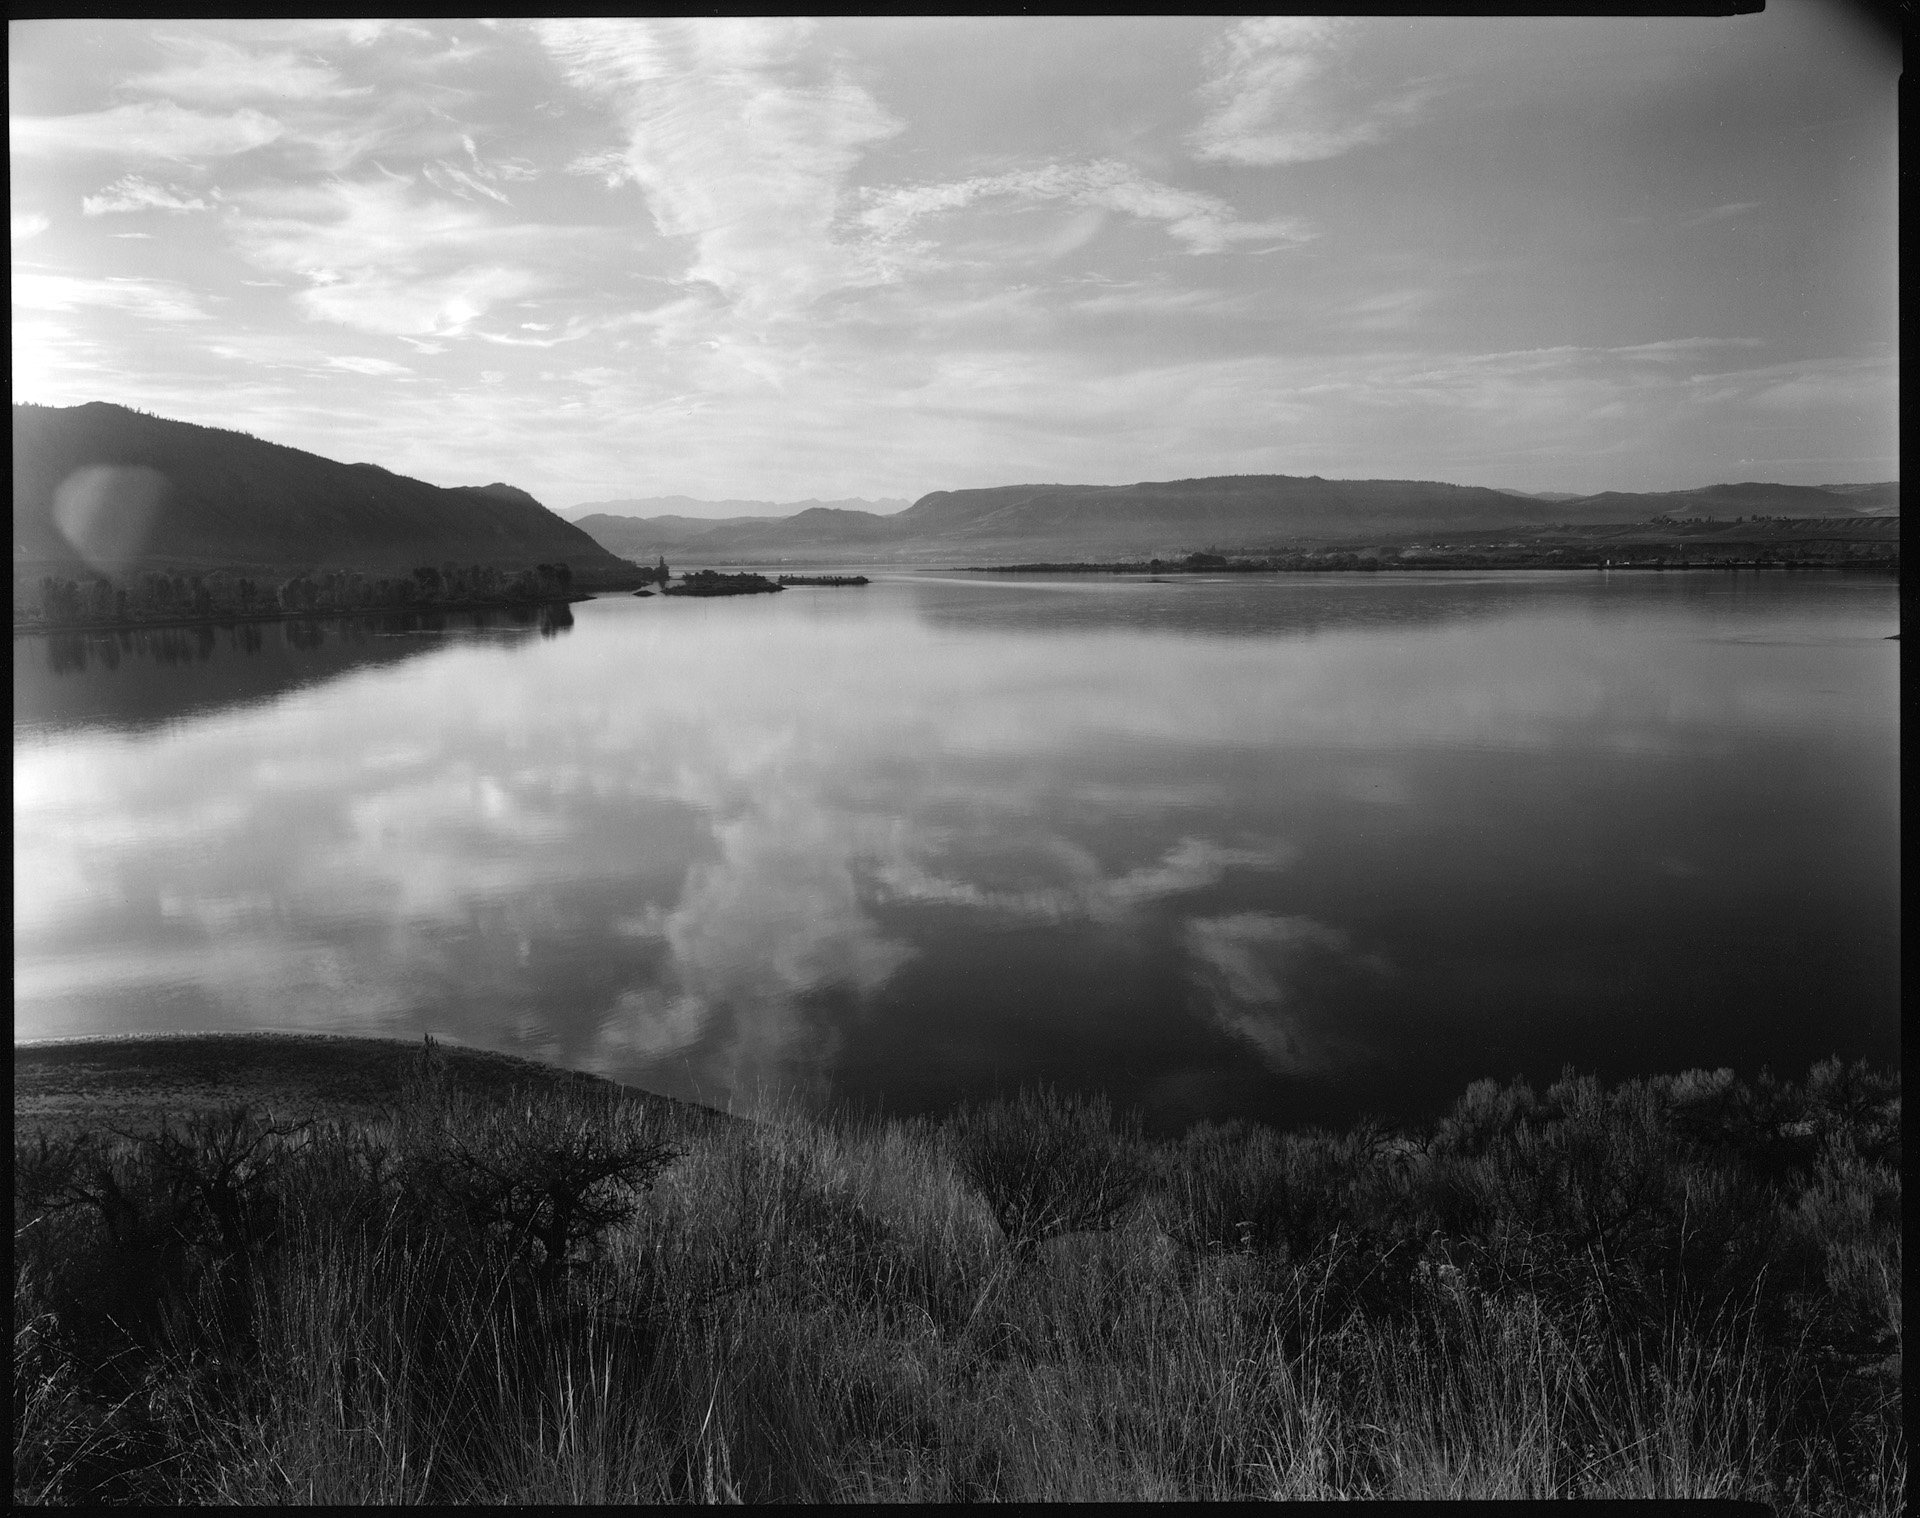  Robbie McClaran “Looking west towards Brewster, Washington at the Big Bend of the Columbia River. 2015. Ancestral land of the Sqilxw.” 